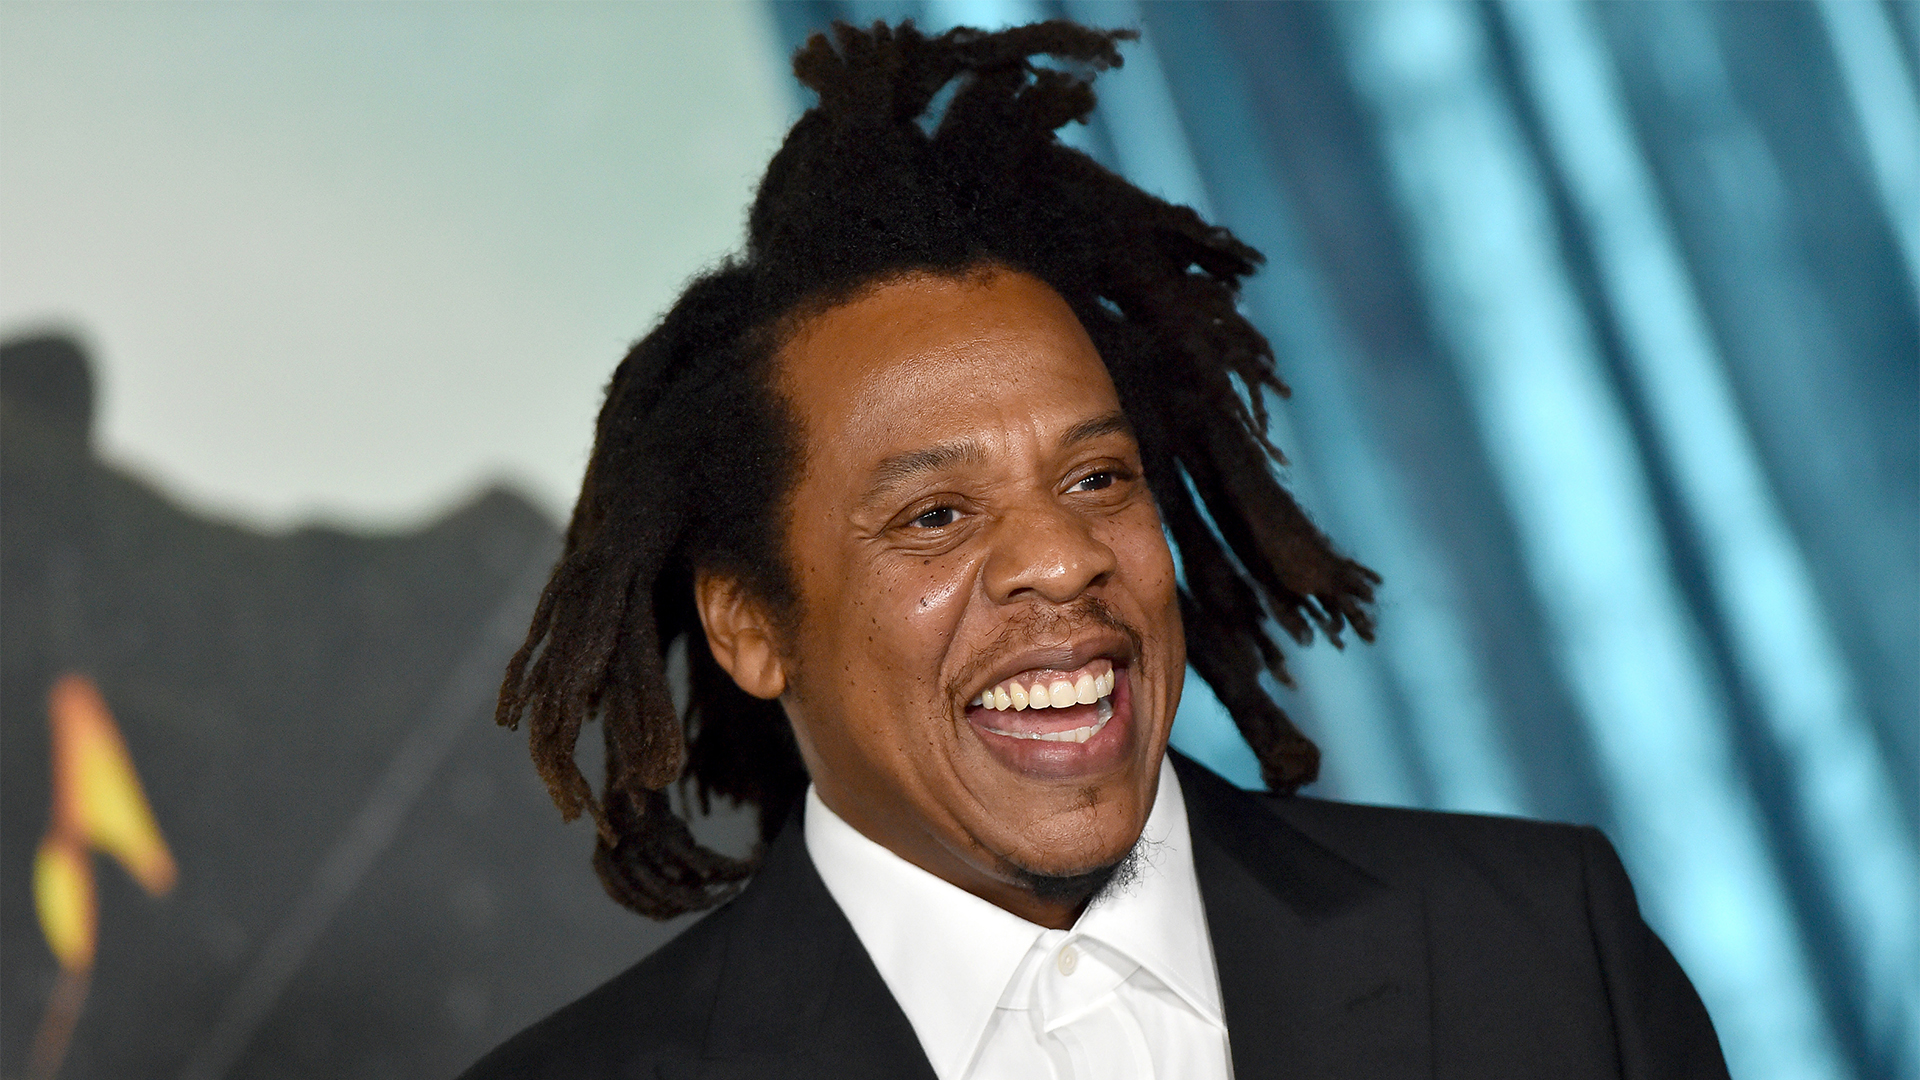 New York Court Upholds Verdict That Jay-Z Is Owed $6.8M From Fragrance Company Parlux